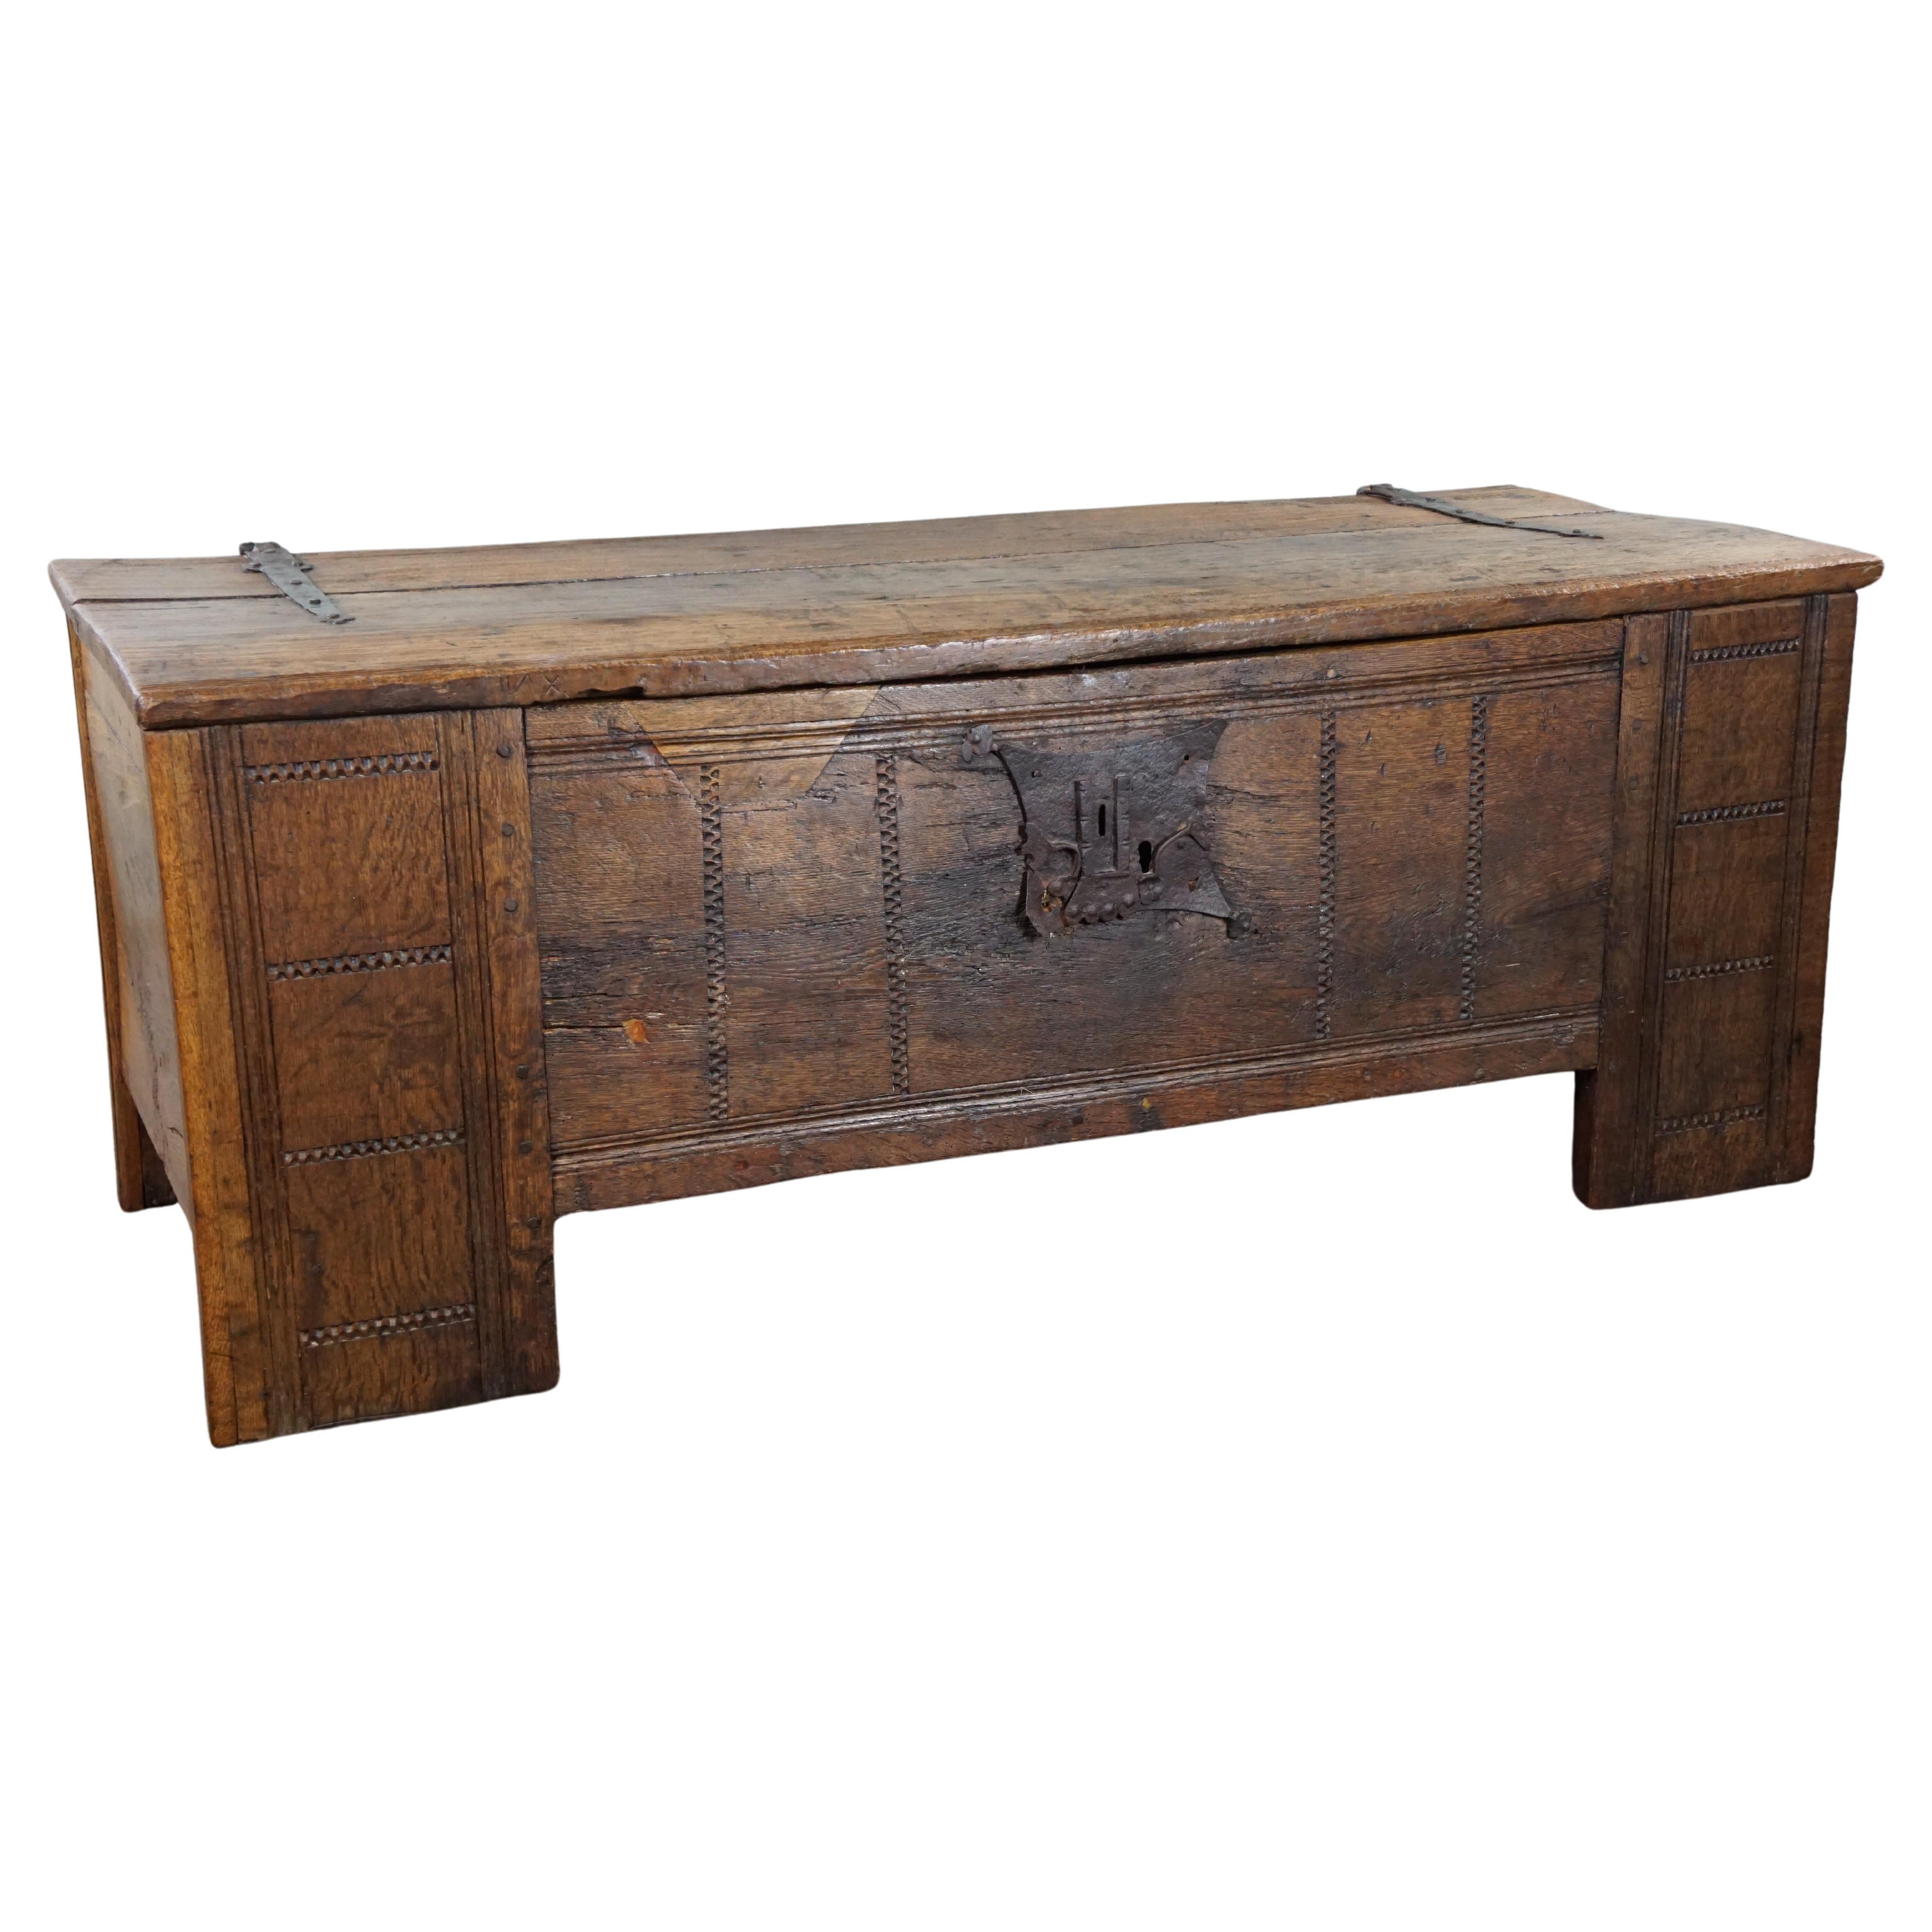 Very large 16th-century primitive oak chest/ coffee table/ sideboard For Sale